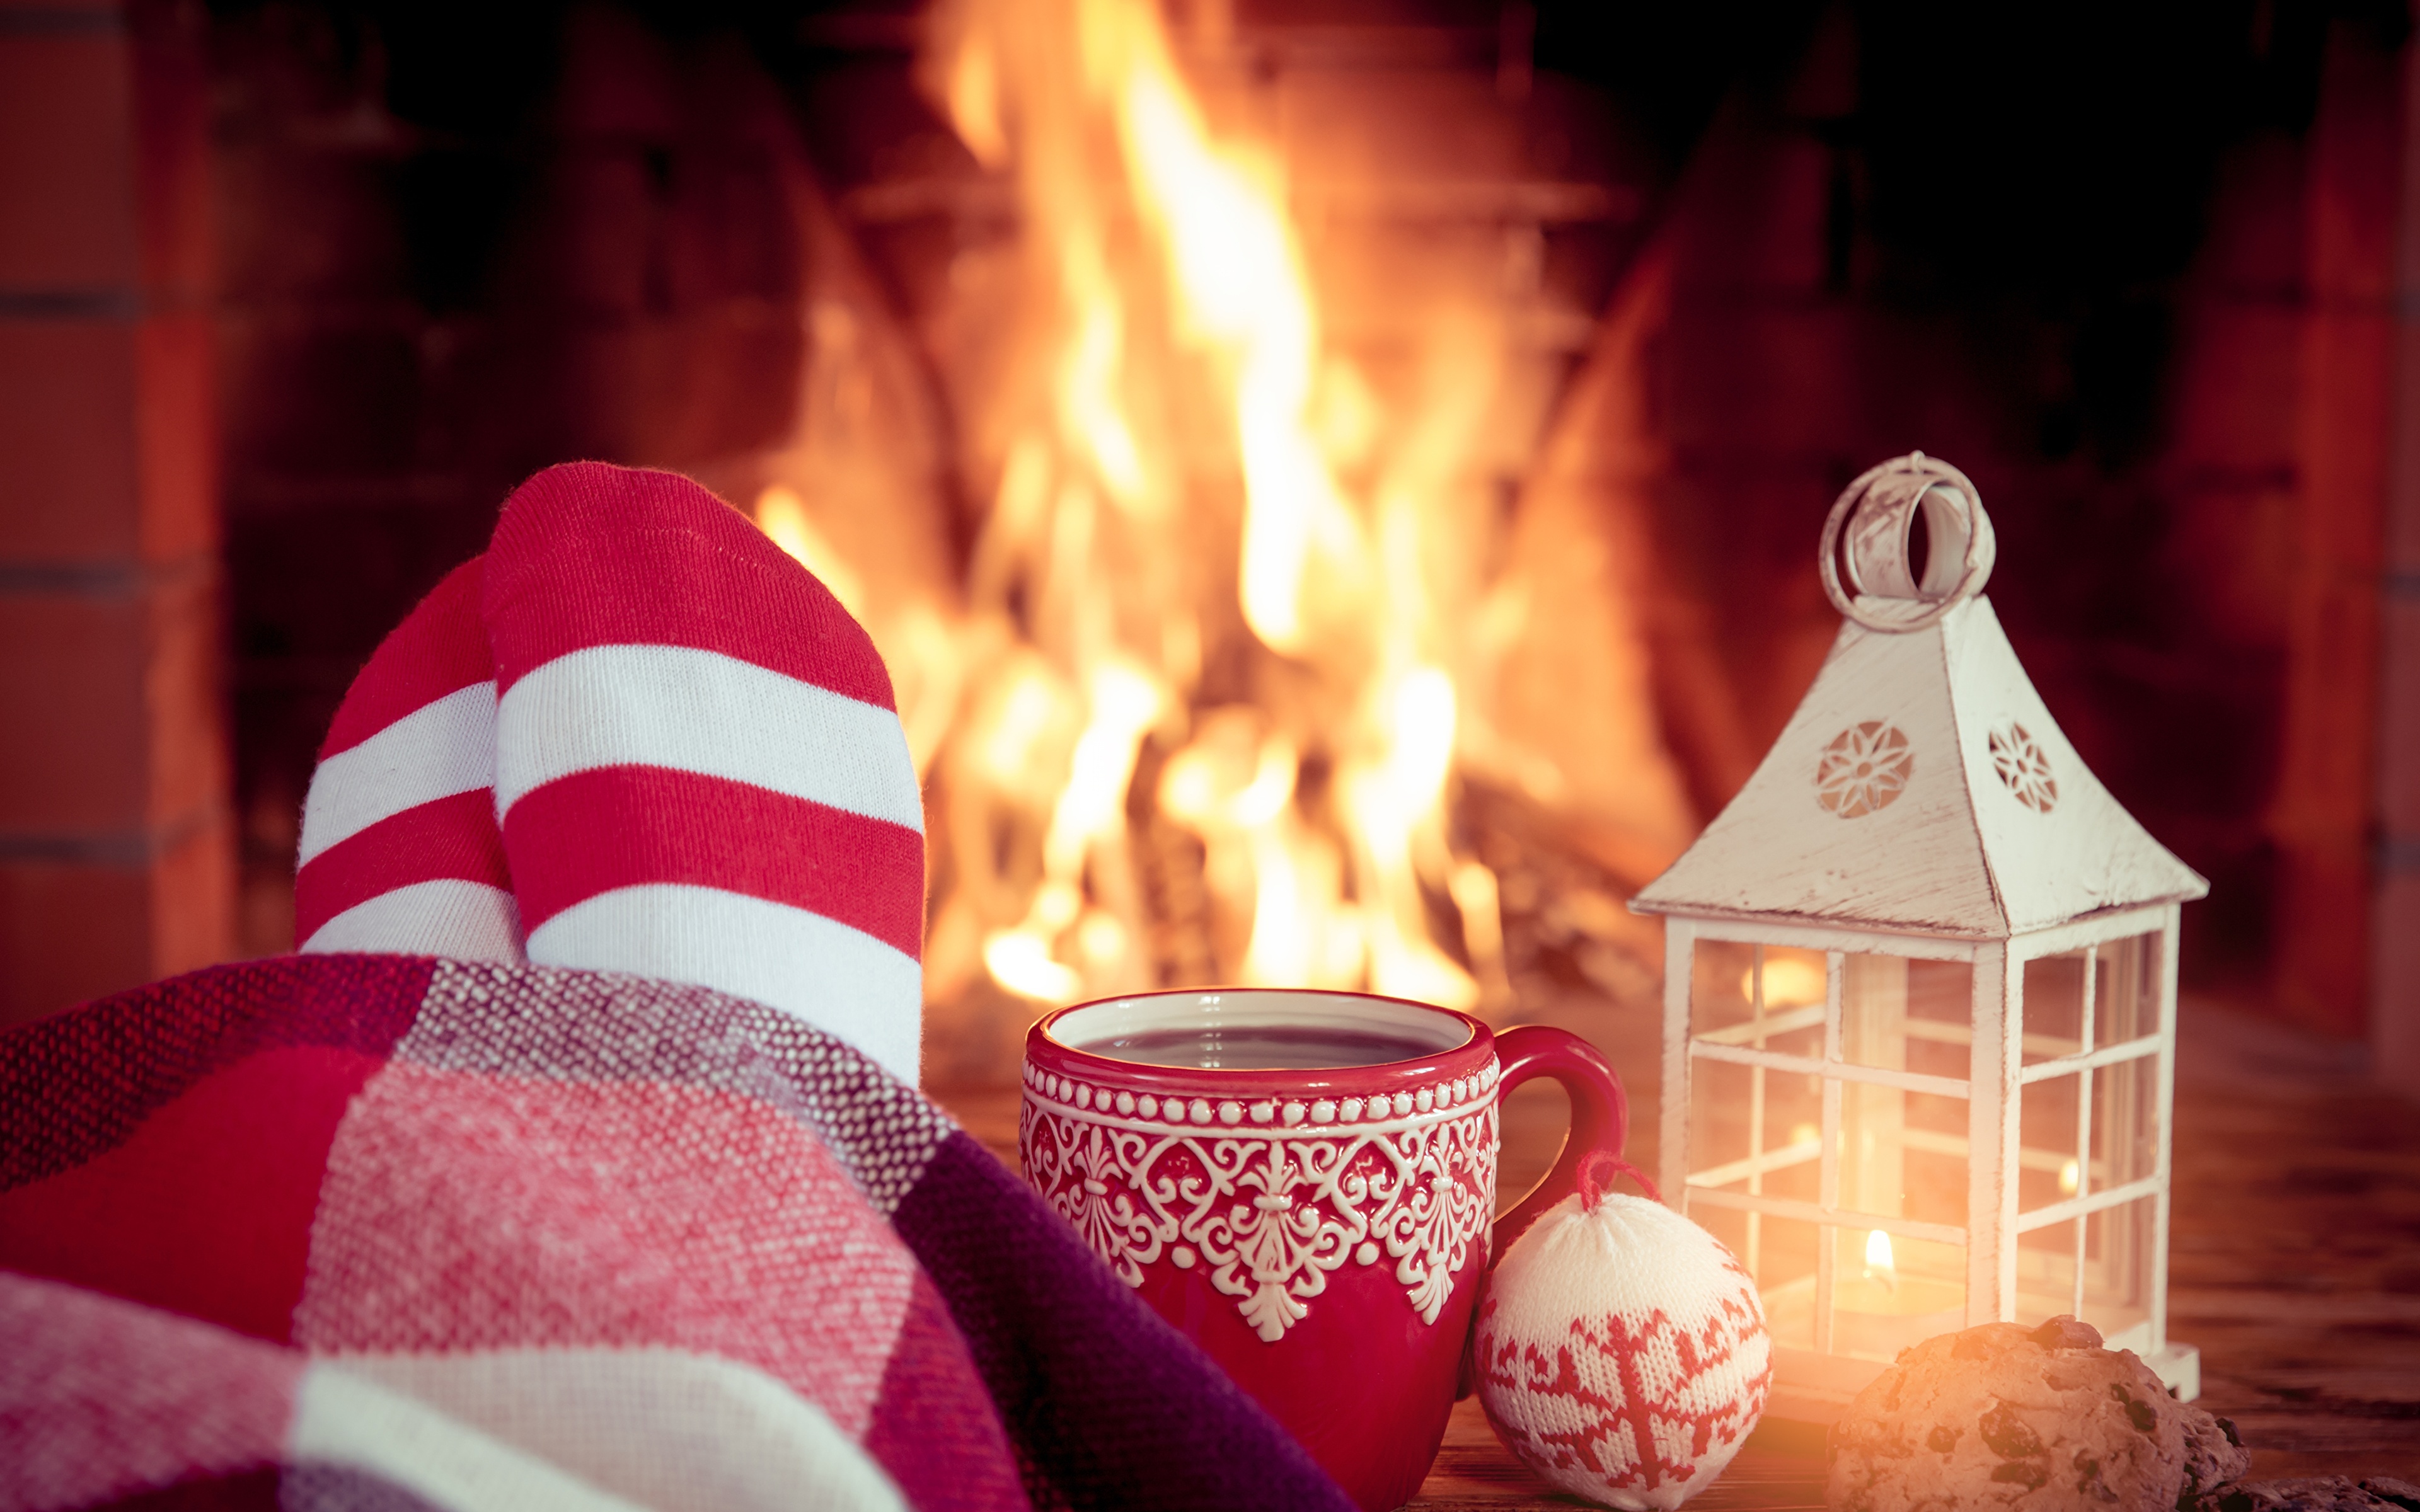 Wallpapers holiday atmosphere new year atmosphere fireplace on the desktop